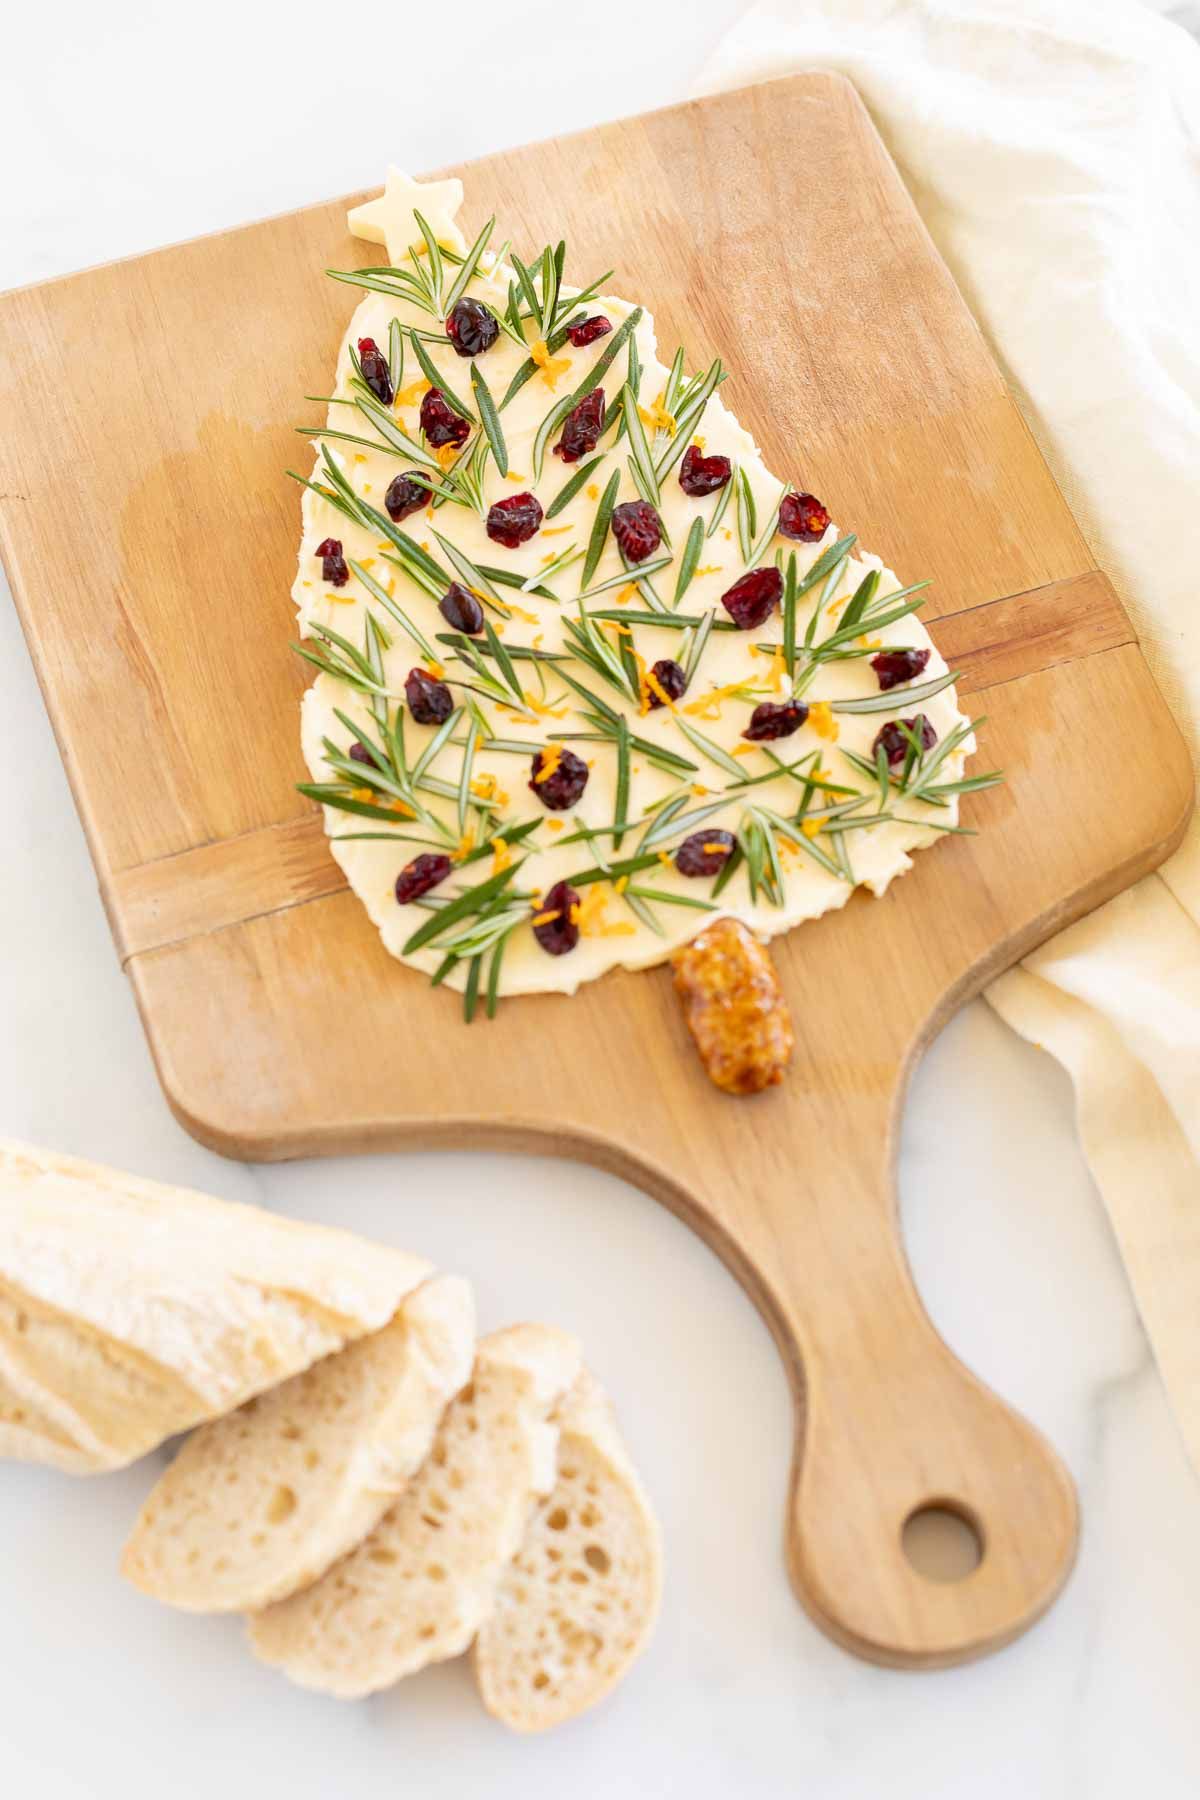 A Christmas butter board placed on a wooden charcuterie board and shaped into a Christmas tree TeamJiX